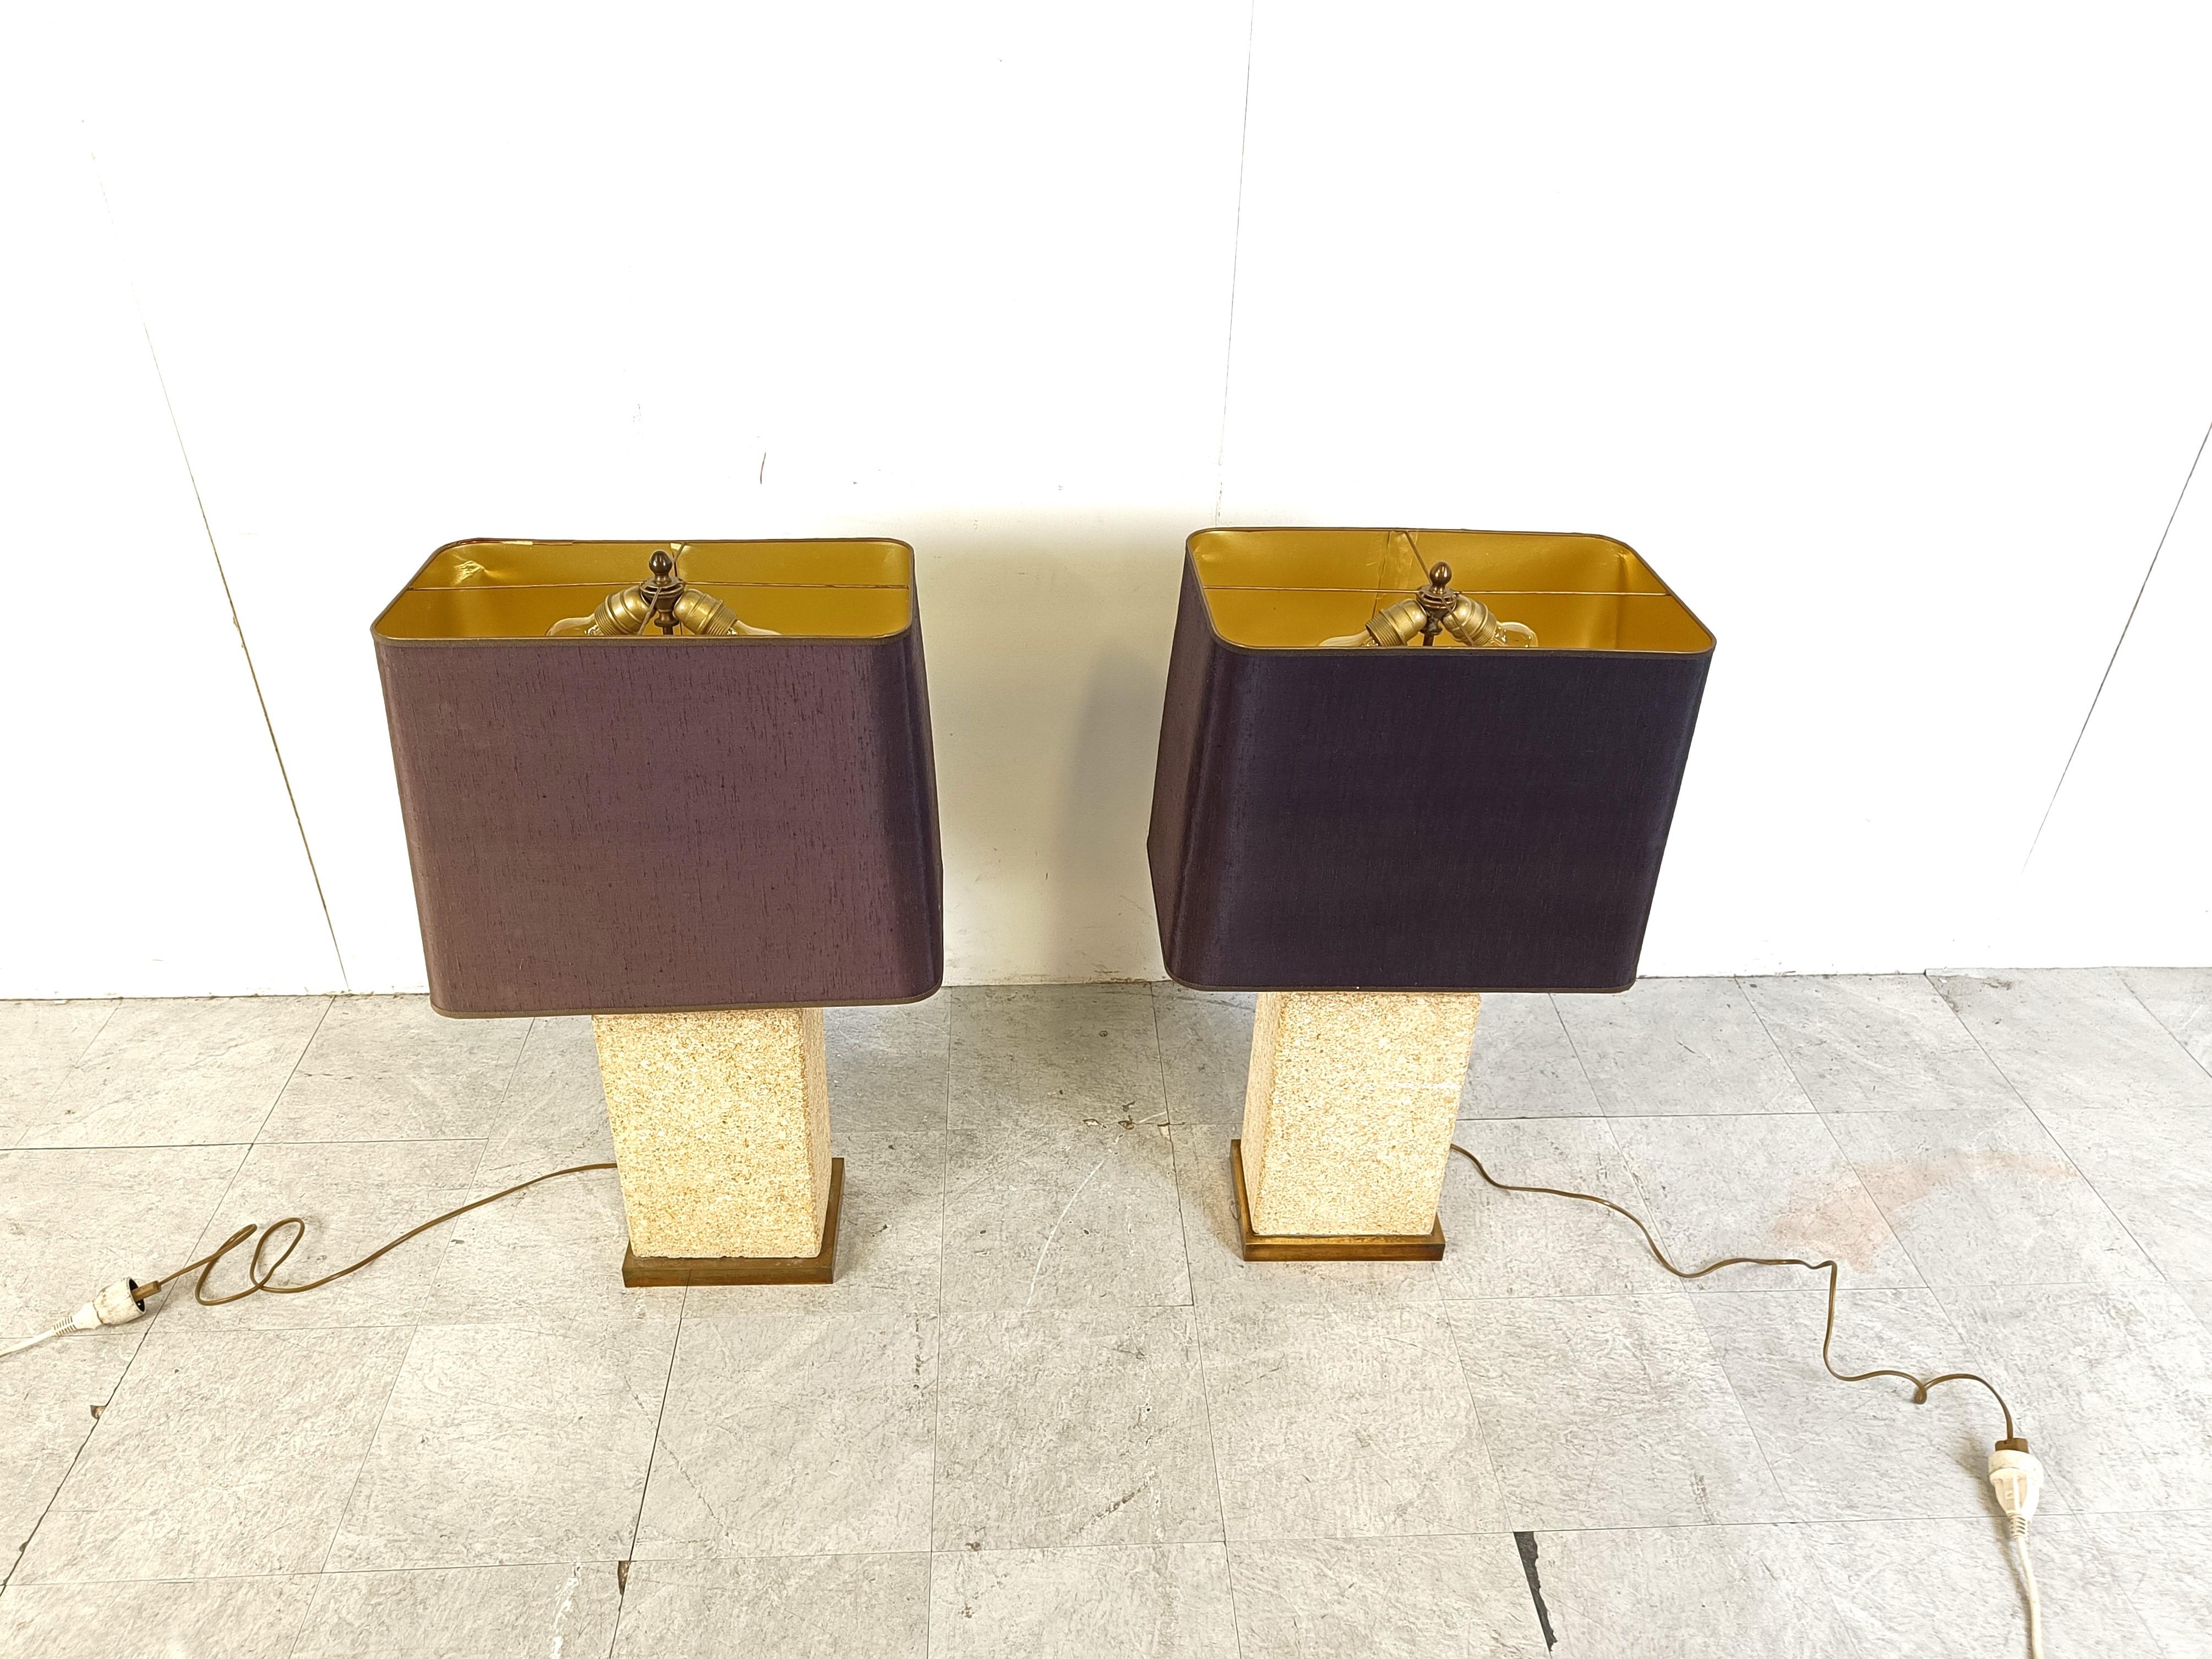 Exquisite Pierre De France natural stone table lamps with Brass bases.

Beautiful and stately pair of table lamps.

1970s - France

Tested and ready for use with a 2 regular E26/E27 size light bulb holders each.

The lamps come with their original